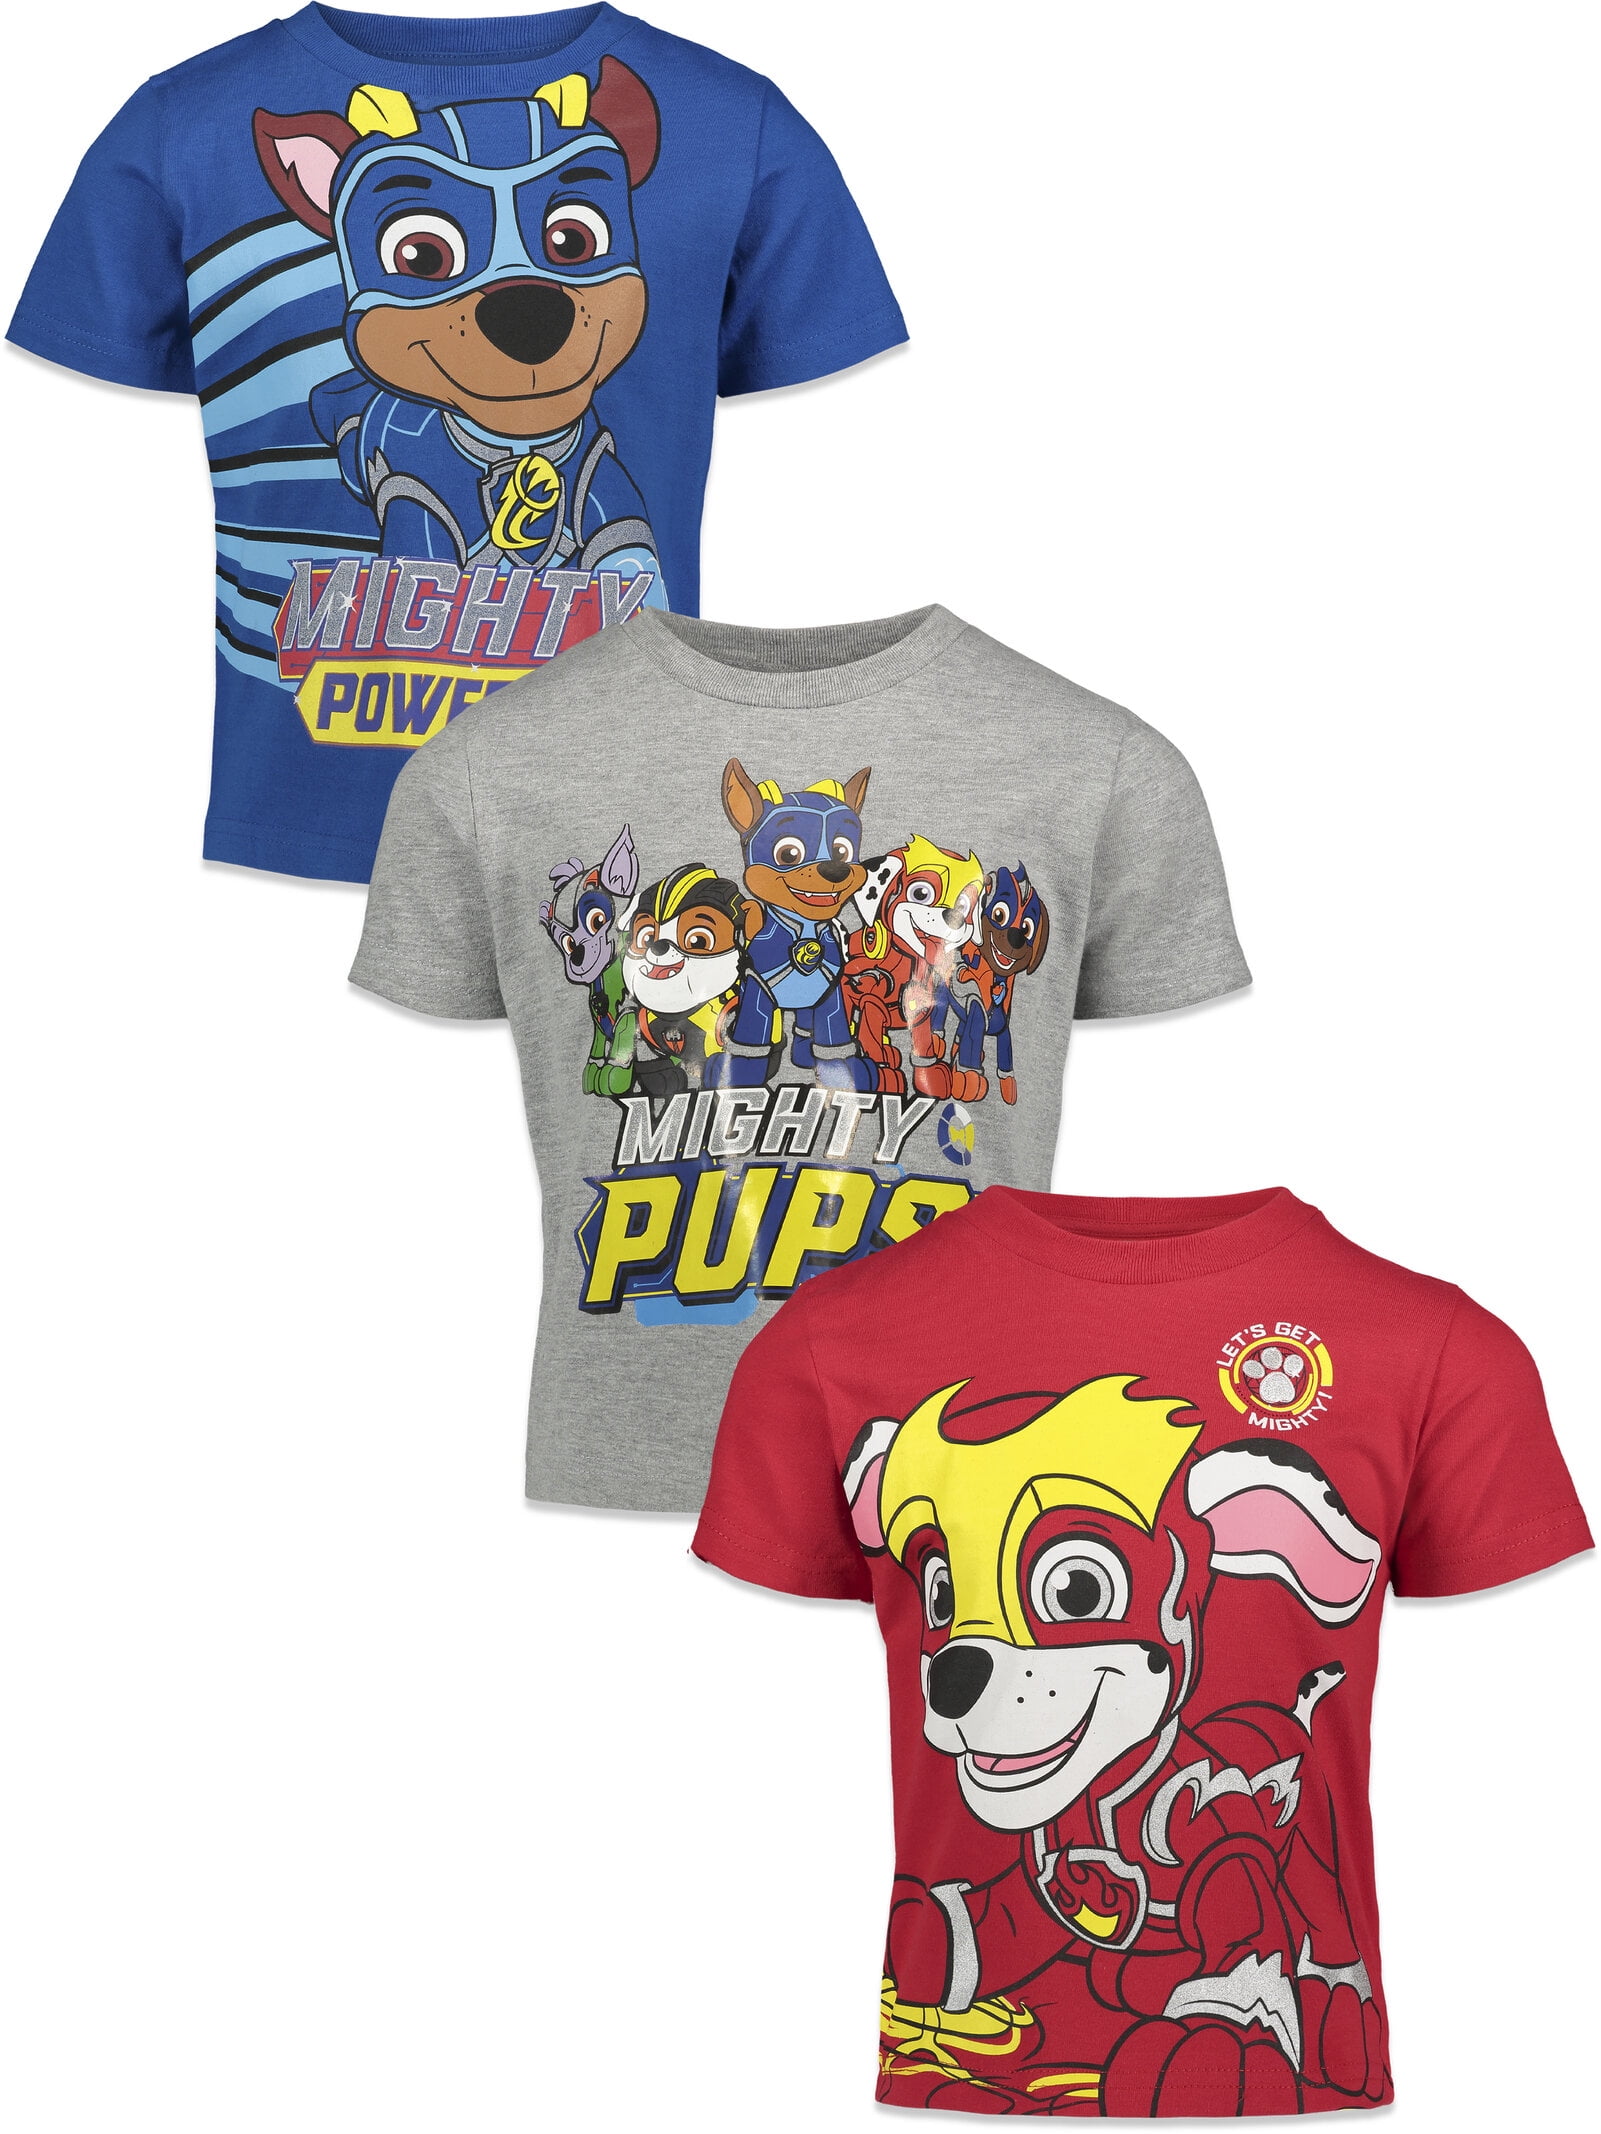 Paw Patrol Ready for Action Short Sleeve T Shirt